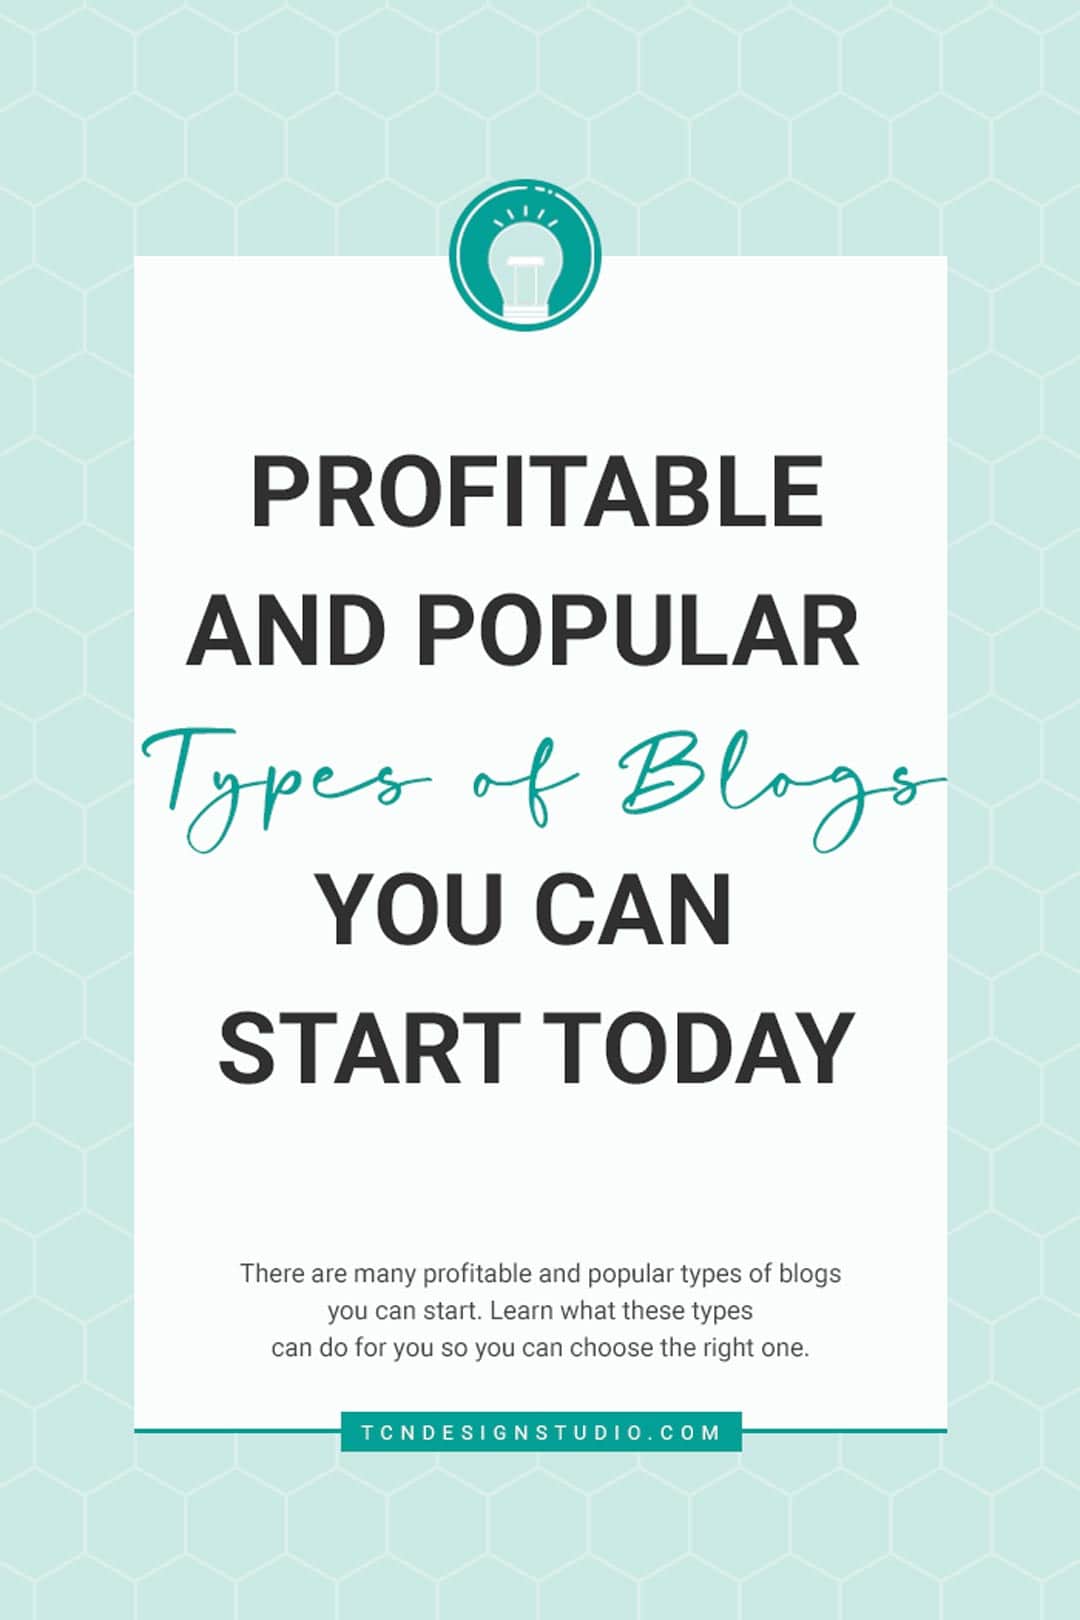 9 Profitable and Popular Types-of Blogs You Can Start Today Cover image